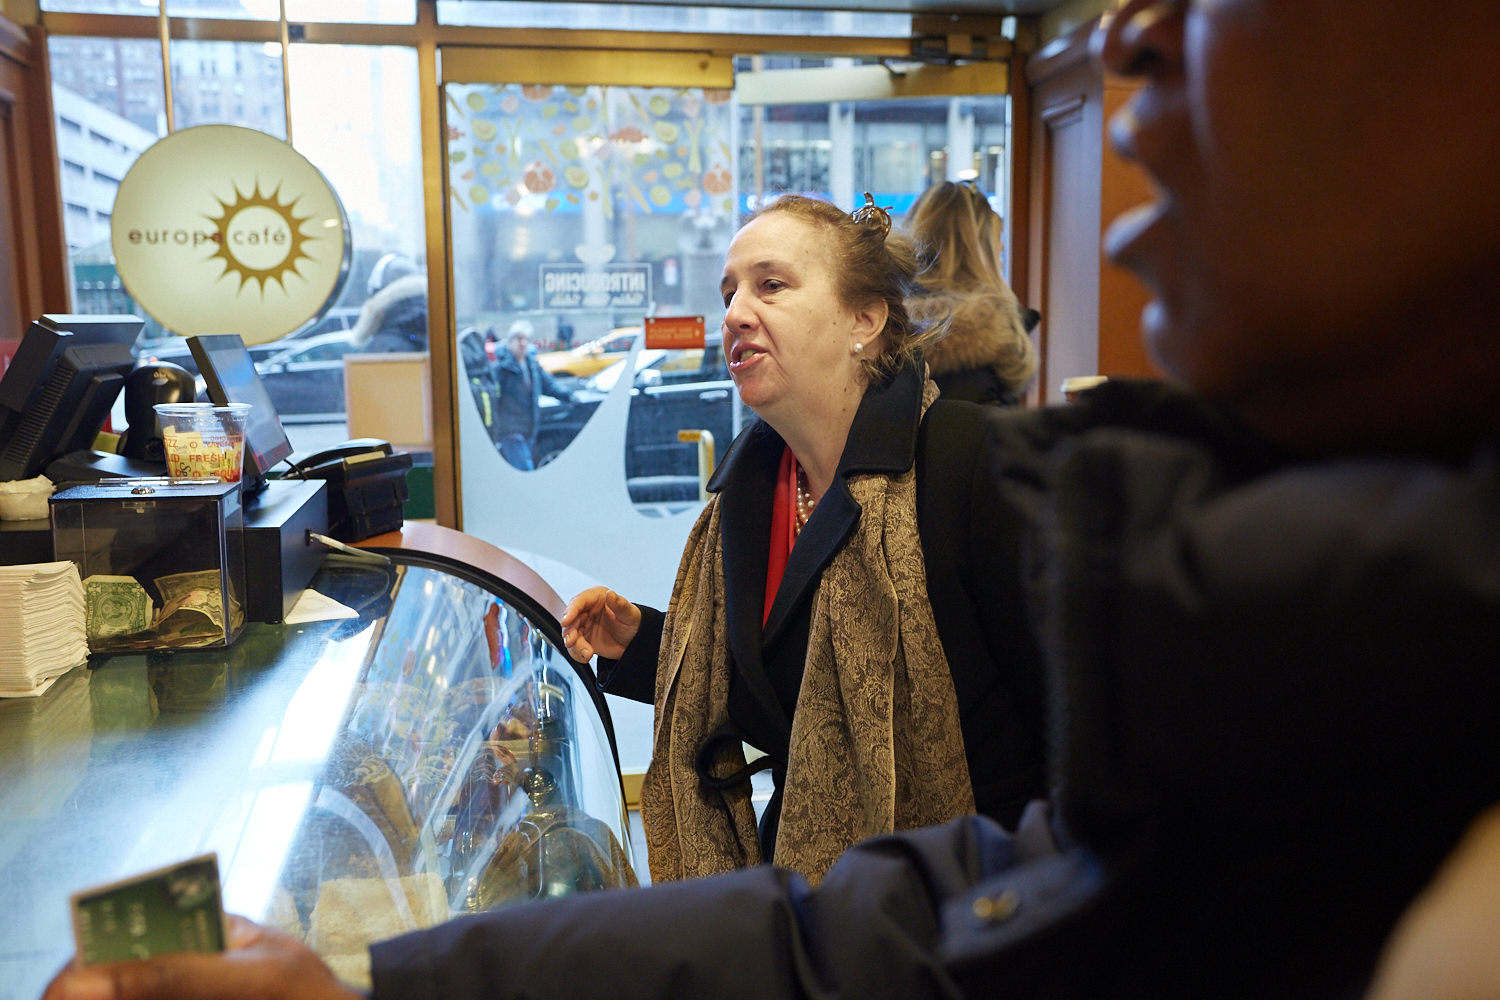 Gale Brewer ordering her first coffee of the day after a morning meeting on 7th Avenue.